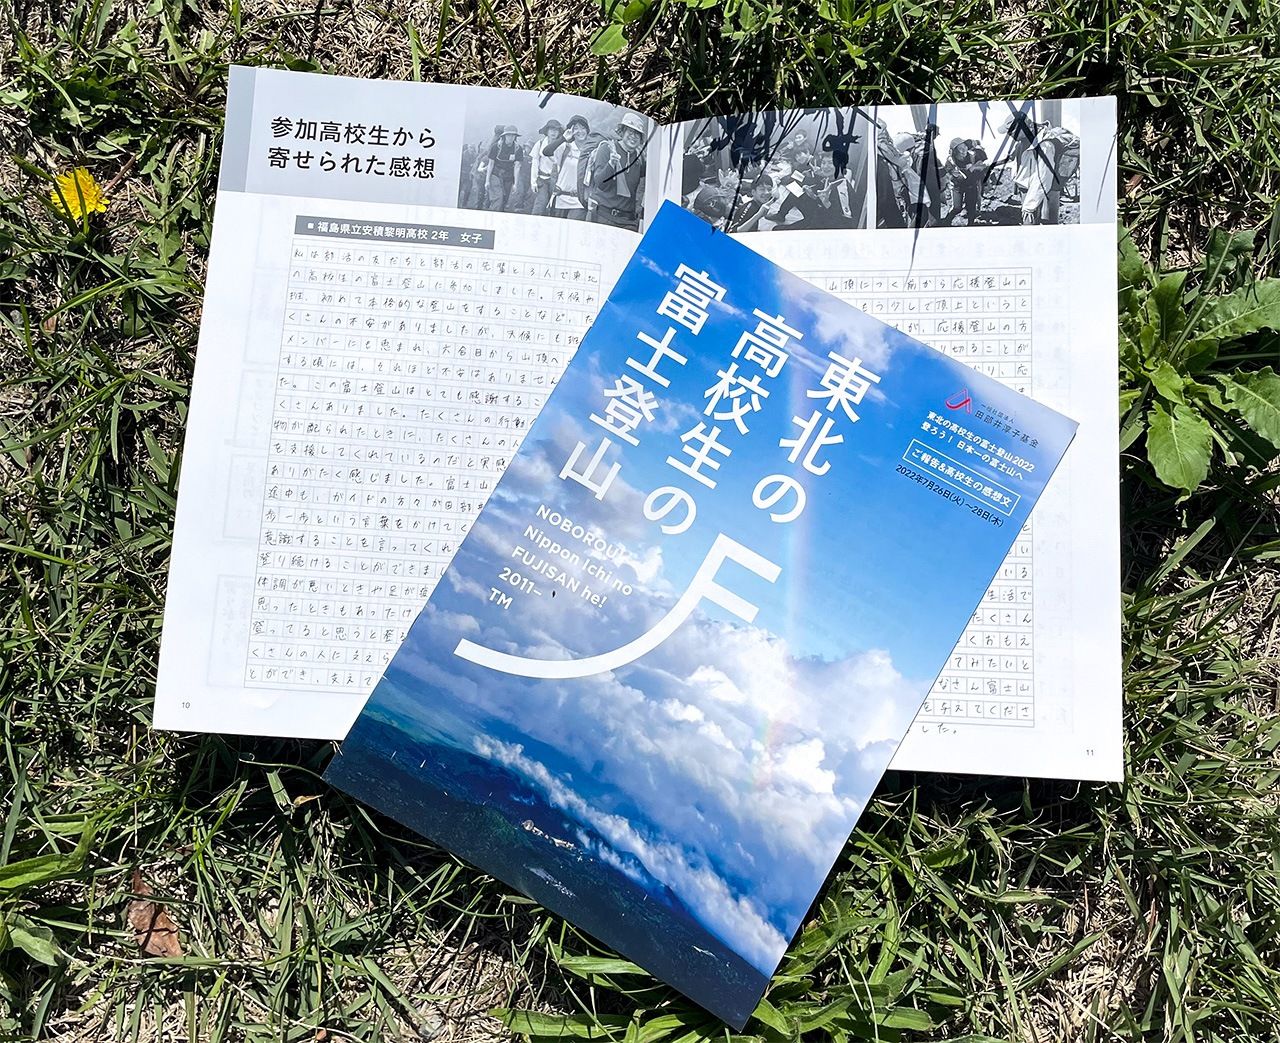 The reflections of the students who make the climb are collected into a single volume and sent to donor companies and individuals. (Photo courtesy of Junko Tabei Fund)